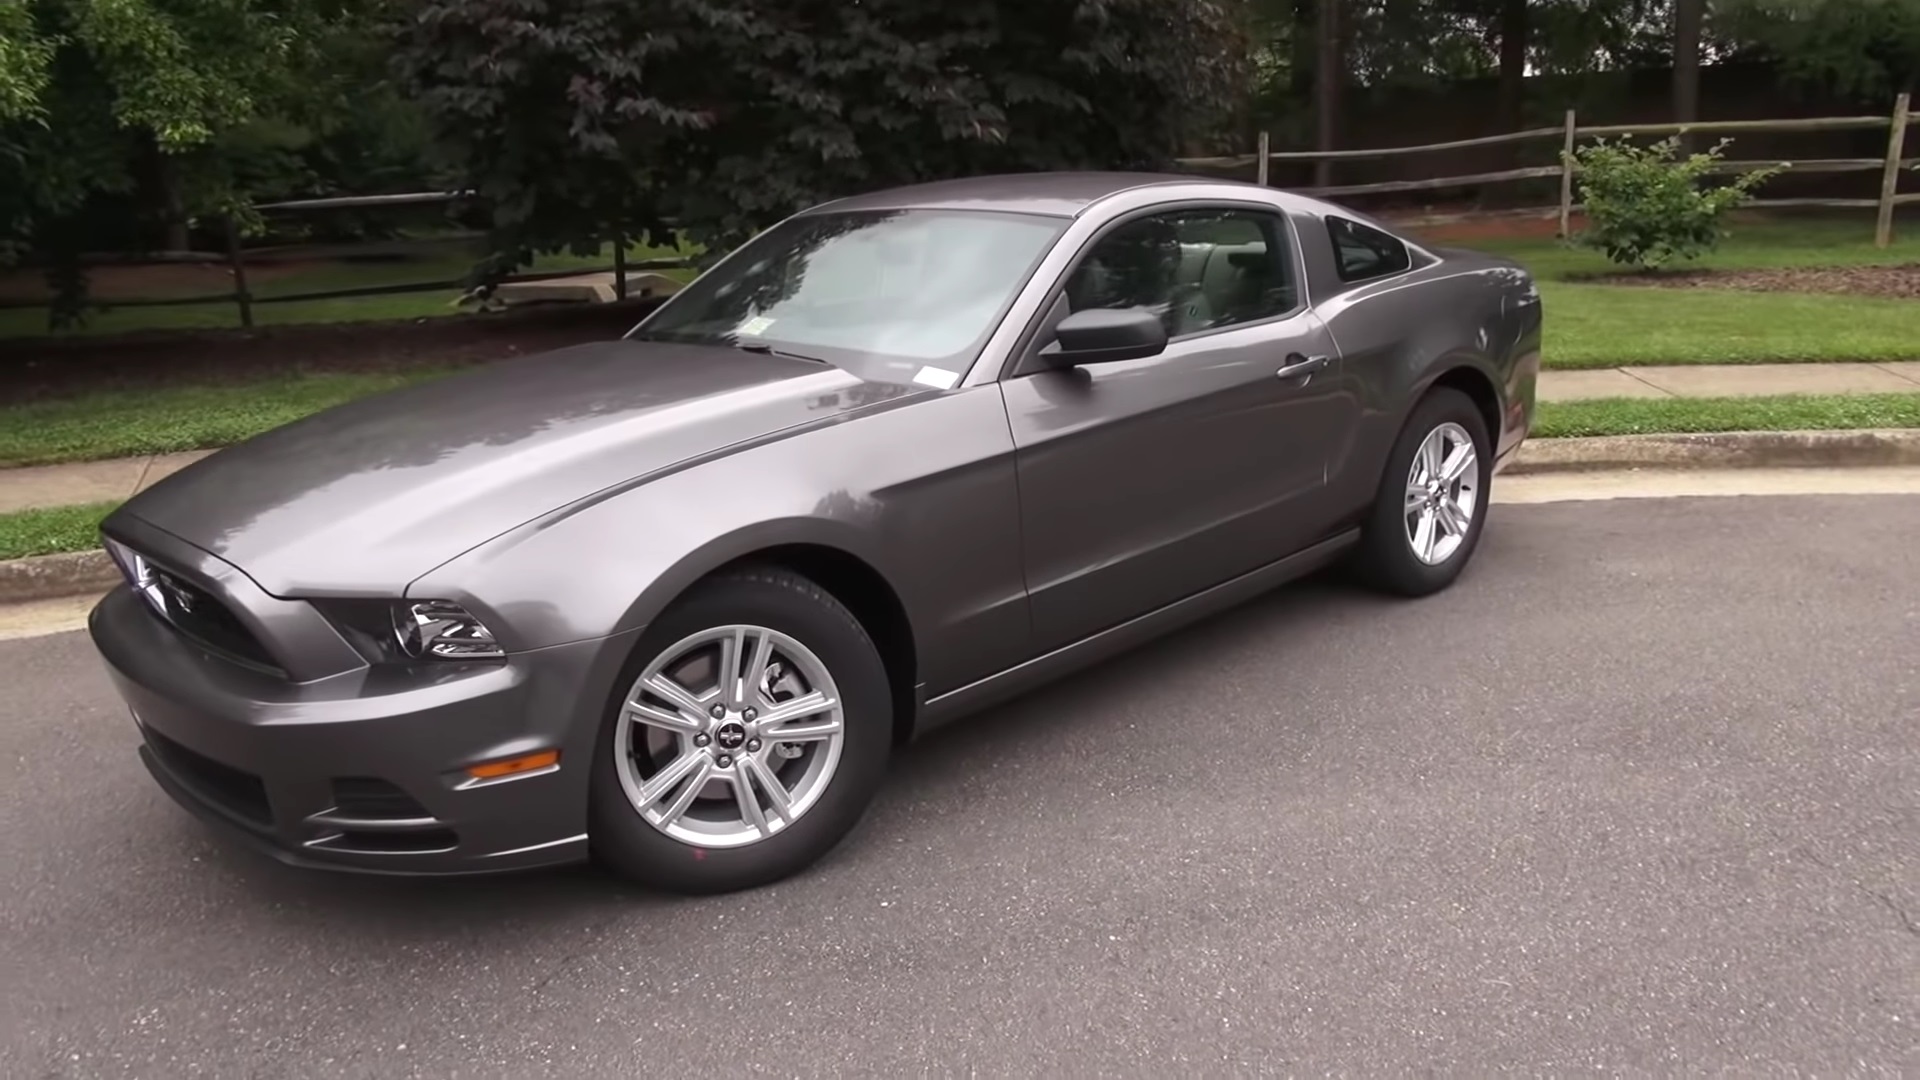 Video: 2014 Ford Mustang V6 6-Speed Walkaround, Exhaust & Test Drive